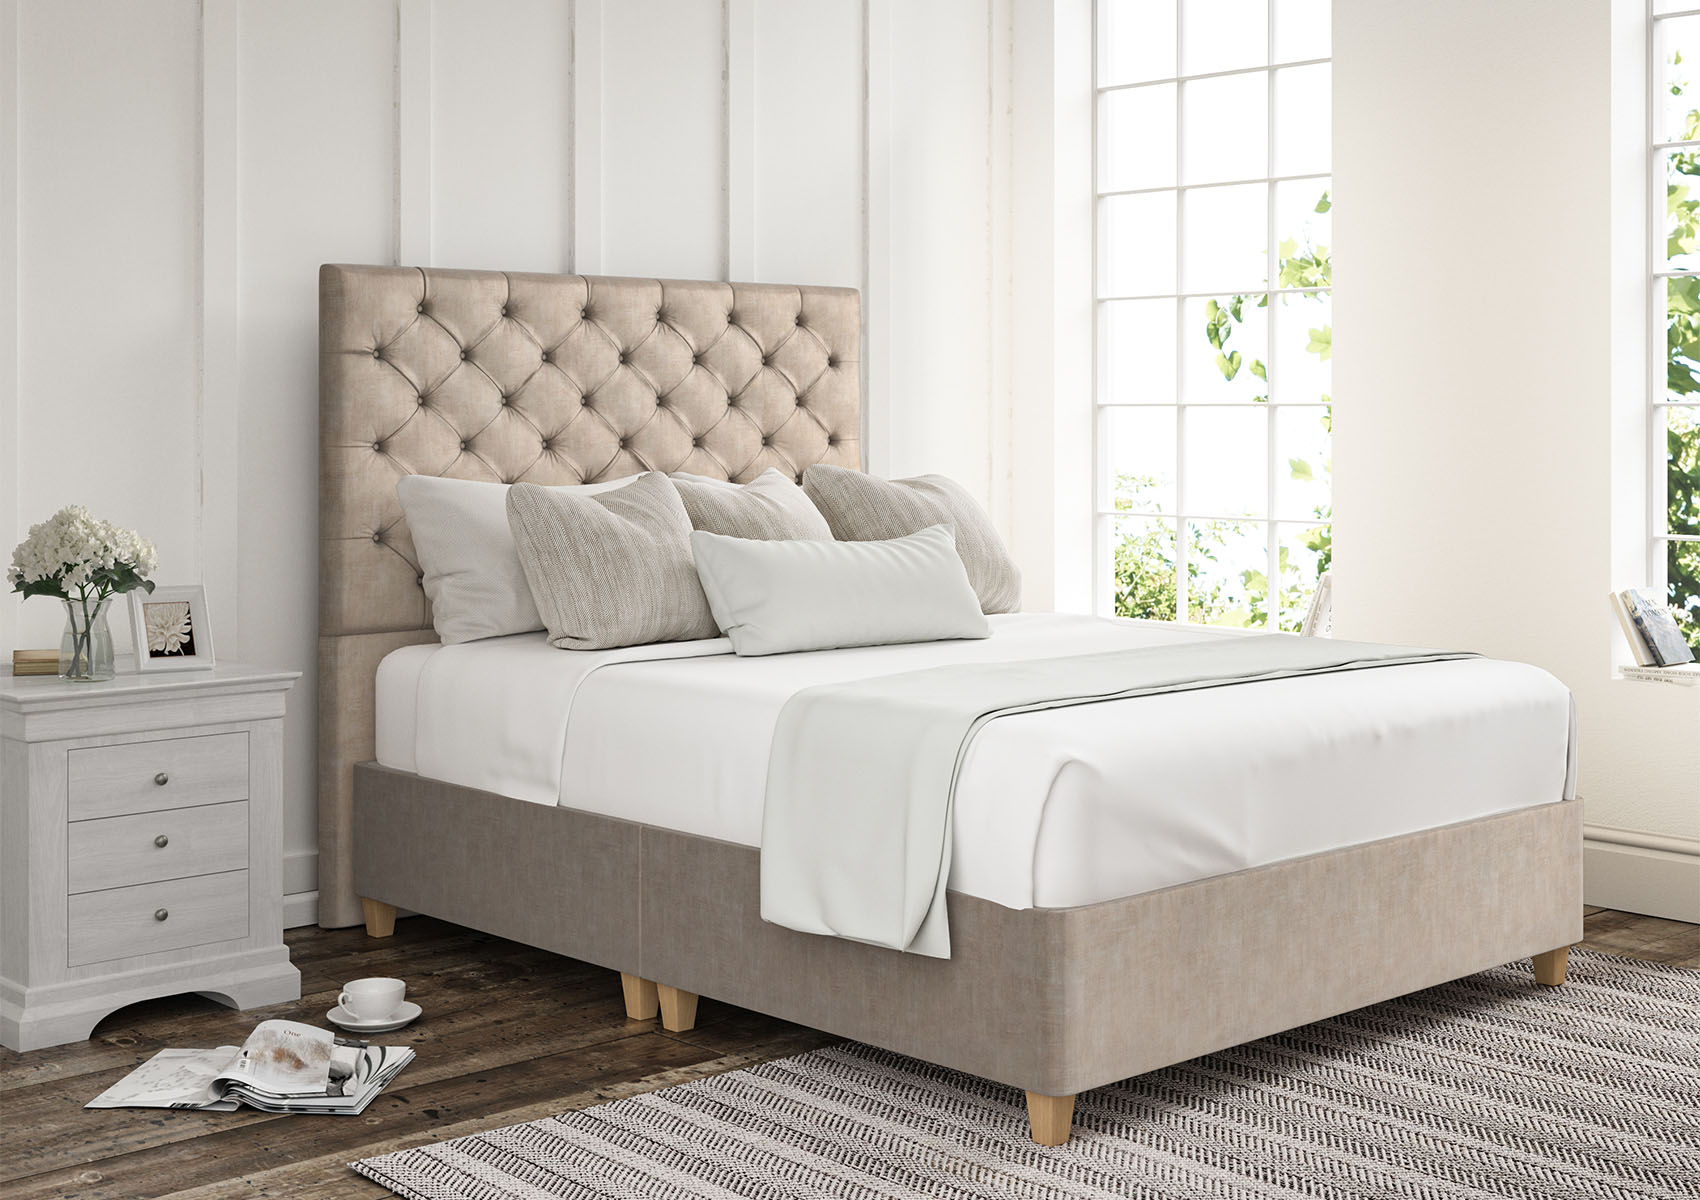 View Chesterfield Teddy Cream Upholstered Single Divan Bed Time4Sleep information